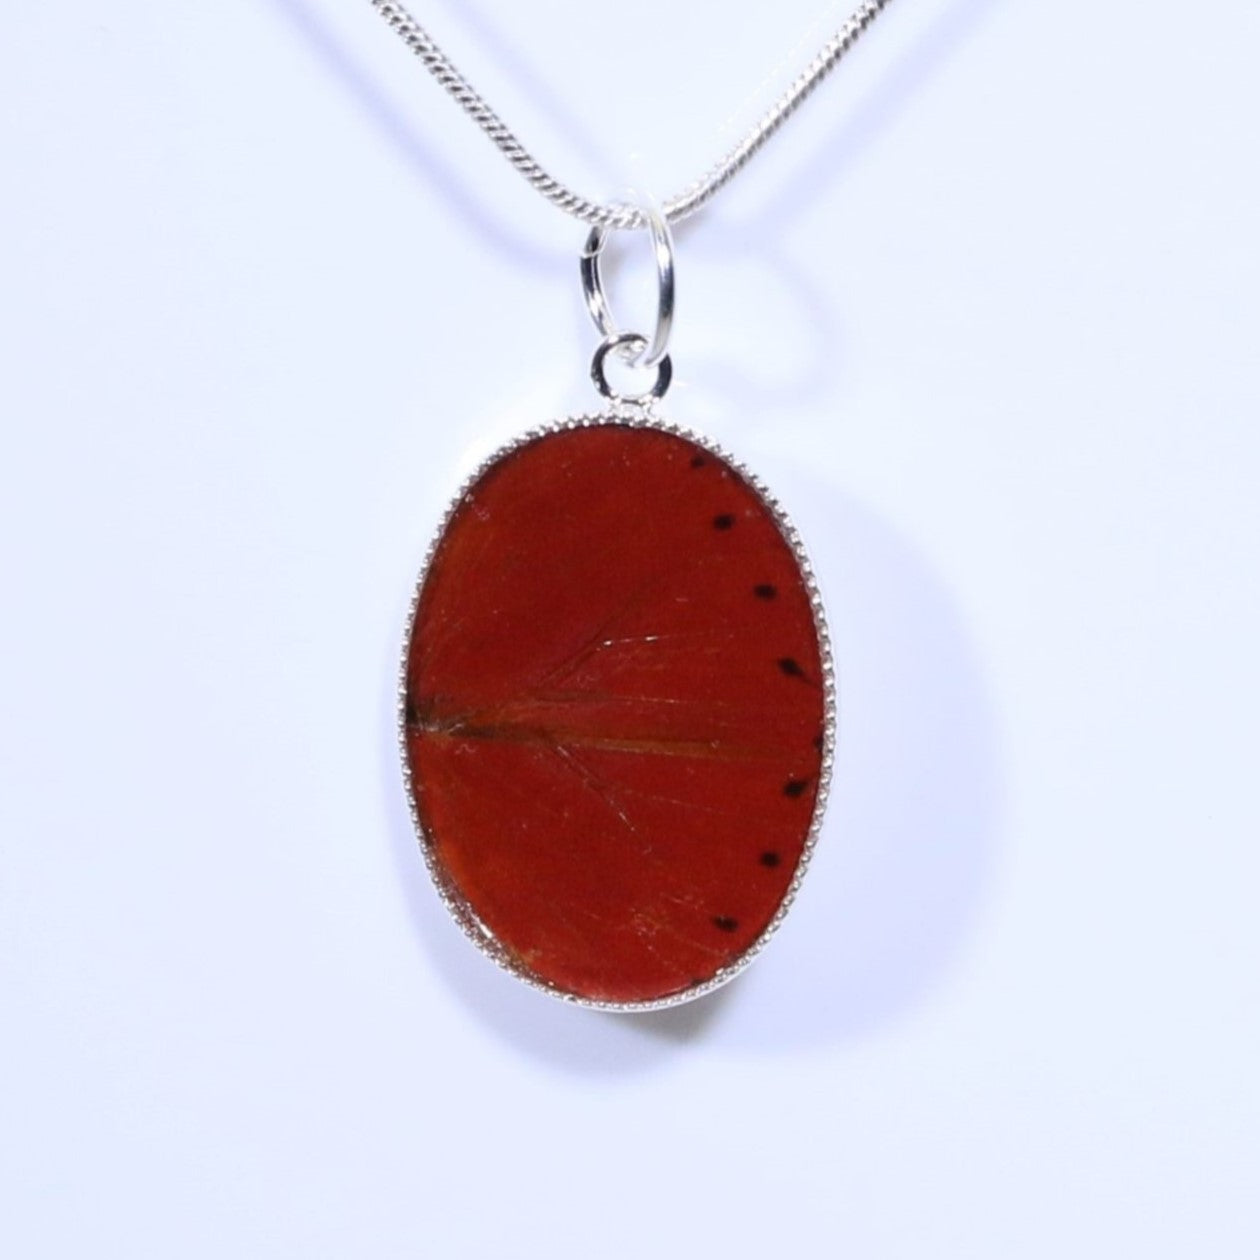 52208 - Real Butterfly Wing Jewelry - Pendant - Medium - Red Glider Butterfly